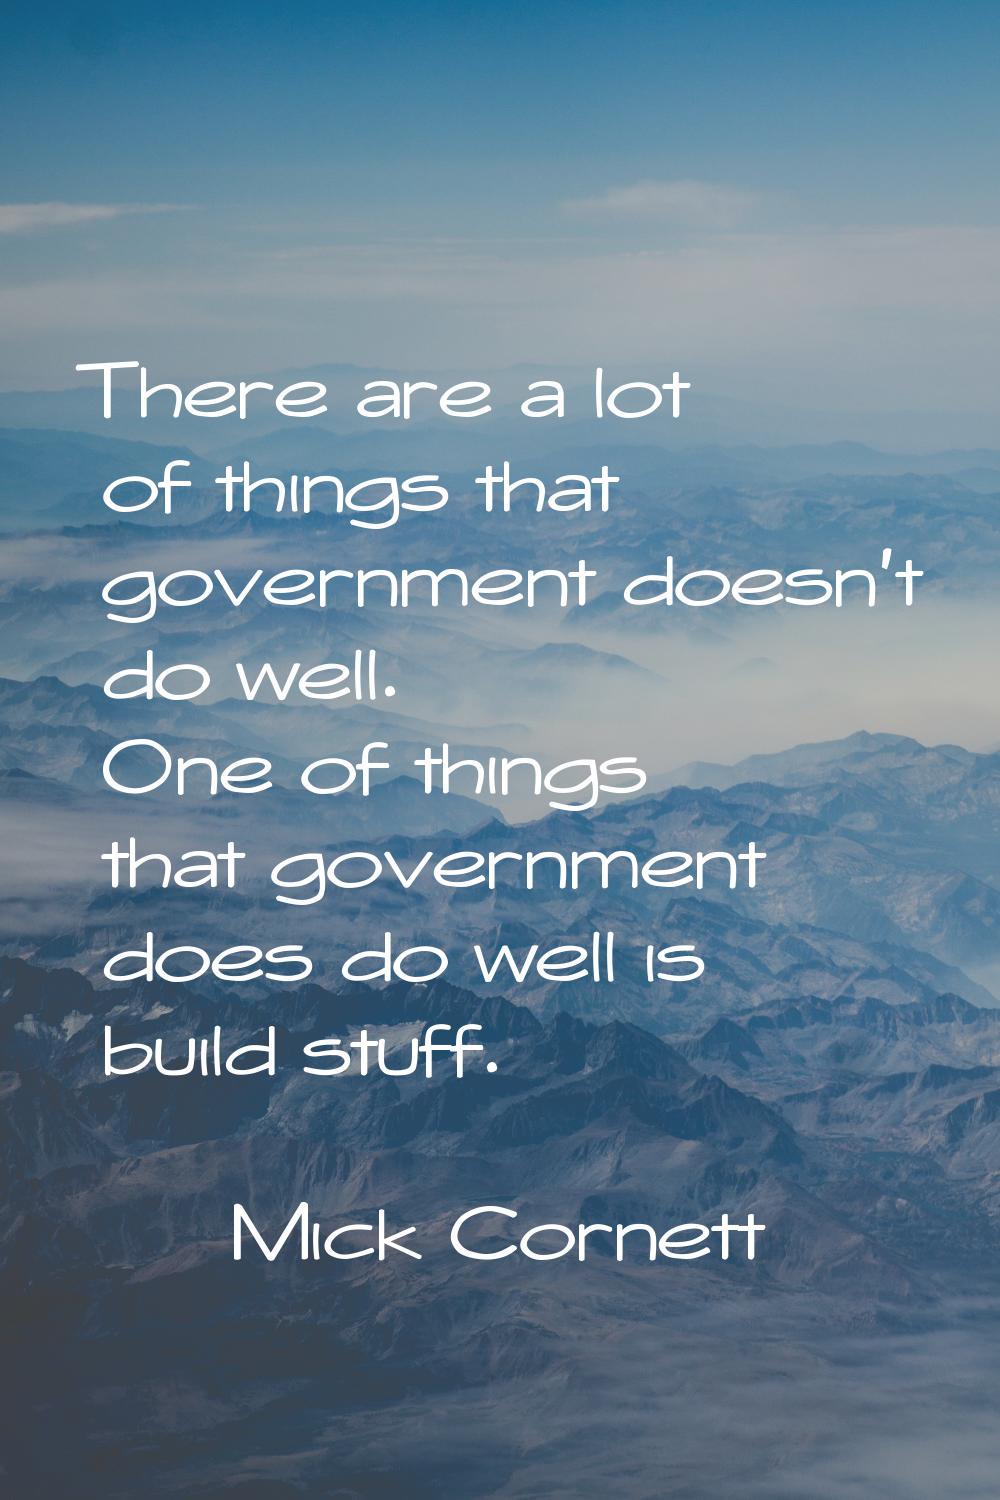 There are a lot of things that government doesn't do well. One of things that government does do we